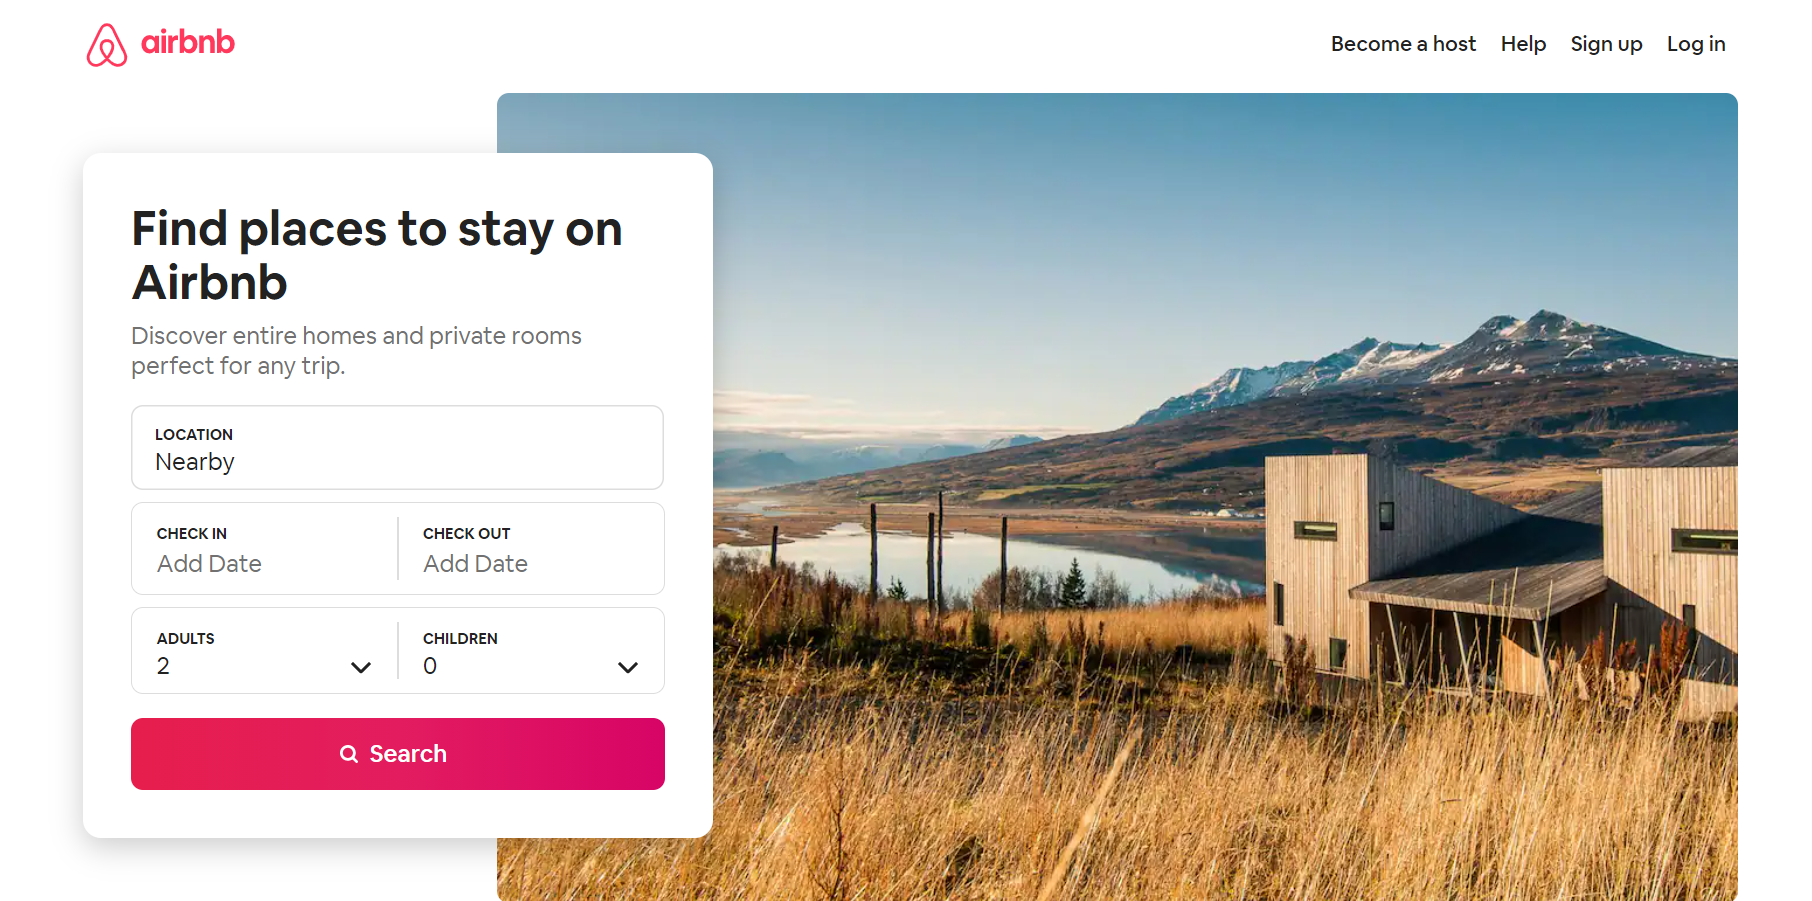 airbnb landing page example